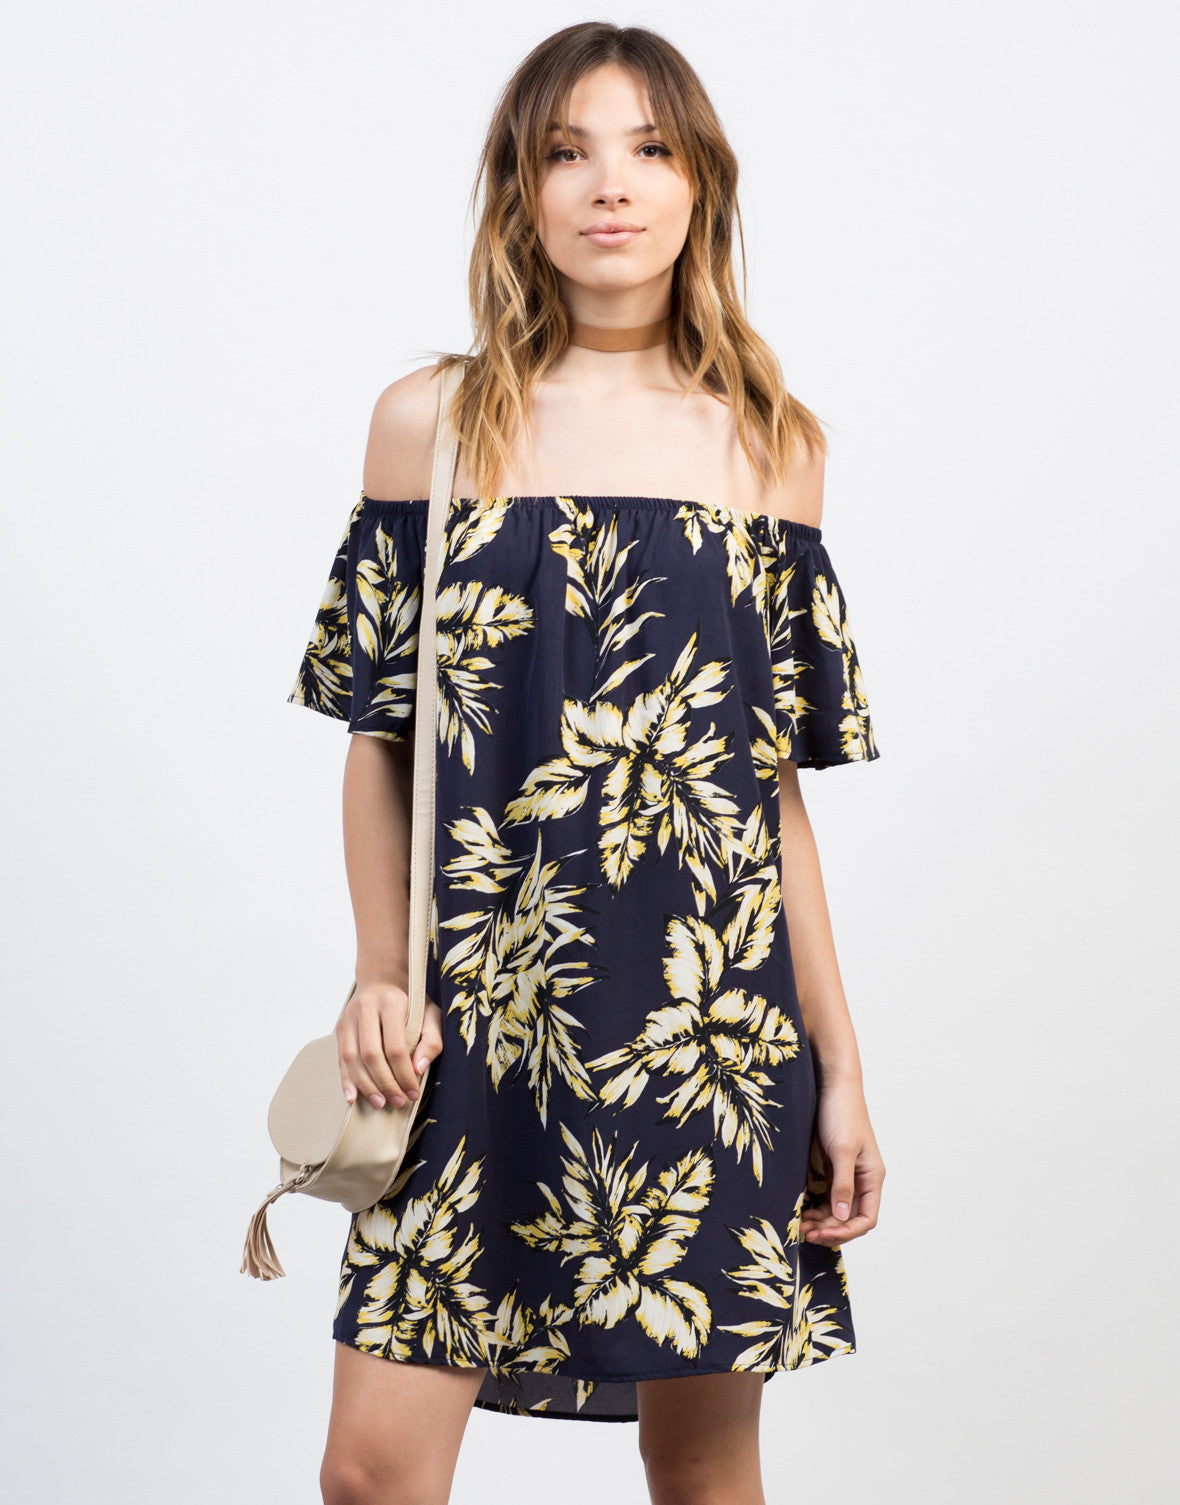 Tropical Vacay Dress - Navy Off the Shoulder Dress - Floral Day Dress ...